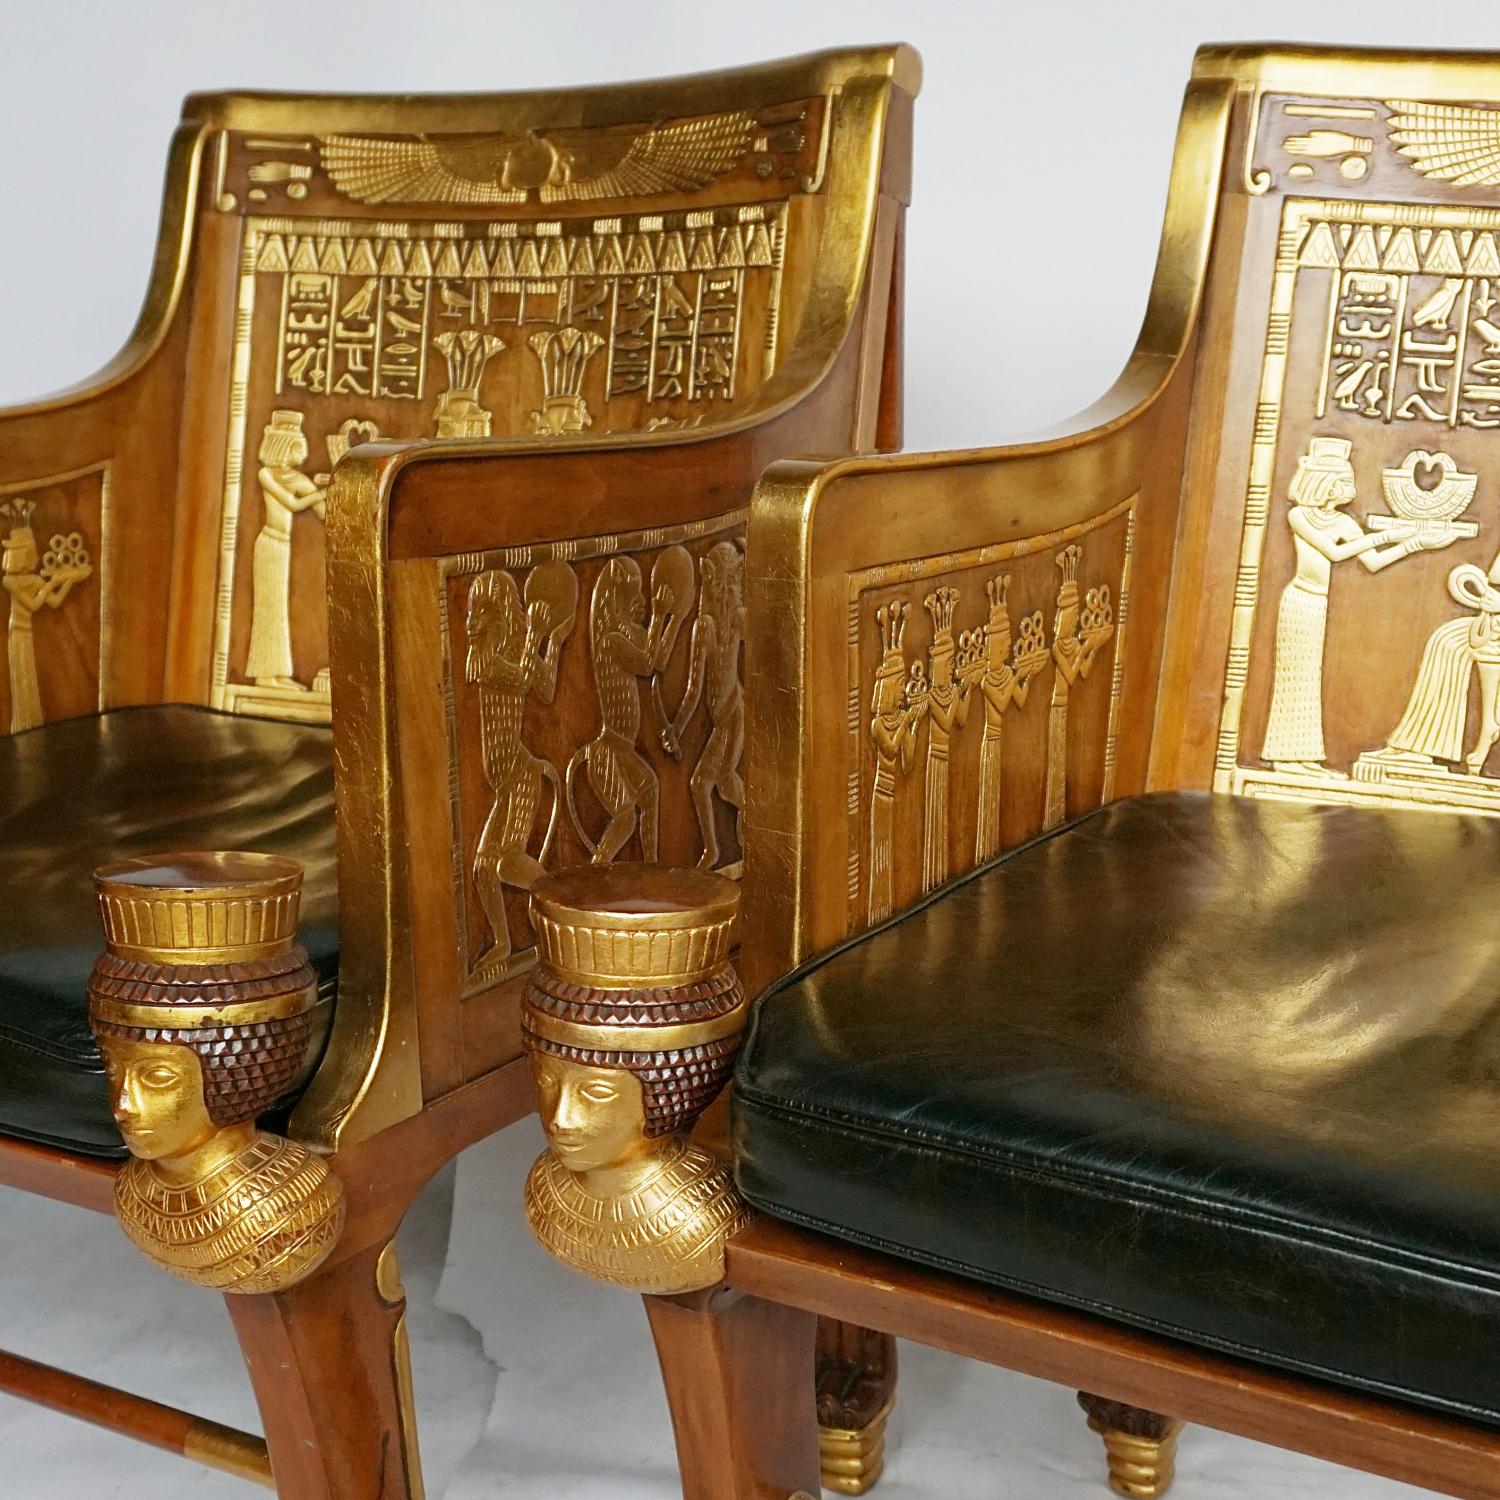 A pair of Egyptian style armchairs. Solid walnut with original gilding. The back is decorated with a winged sun disc, a rectangular panel below depicting a dual image of the seated princess Sitamun receiving a golden collar from the southern